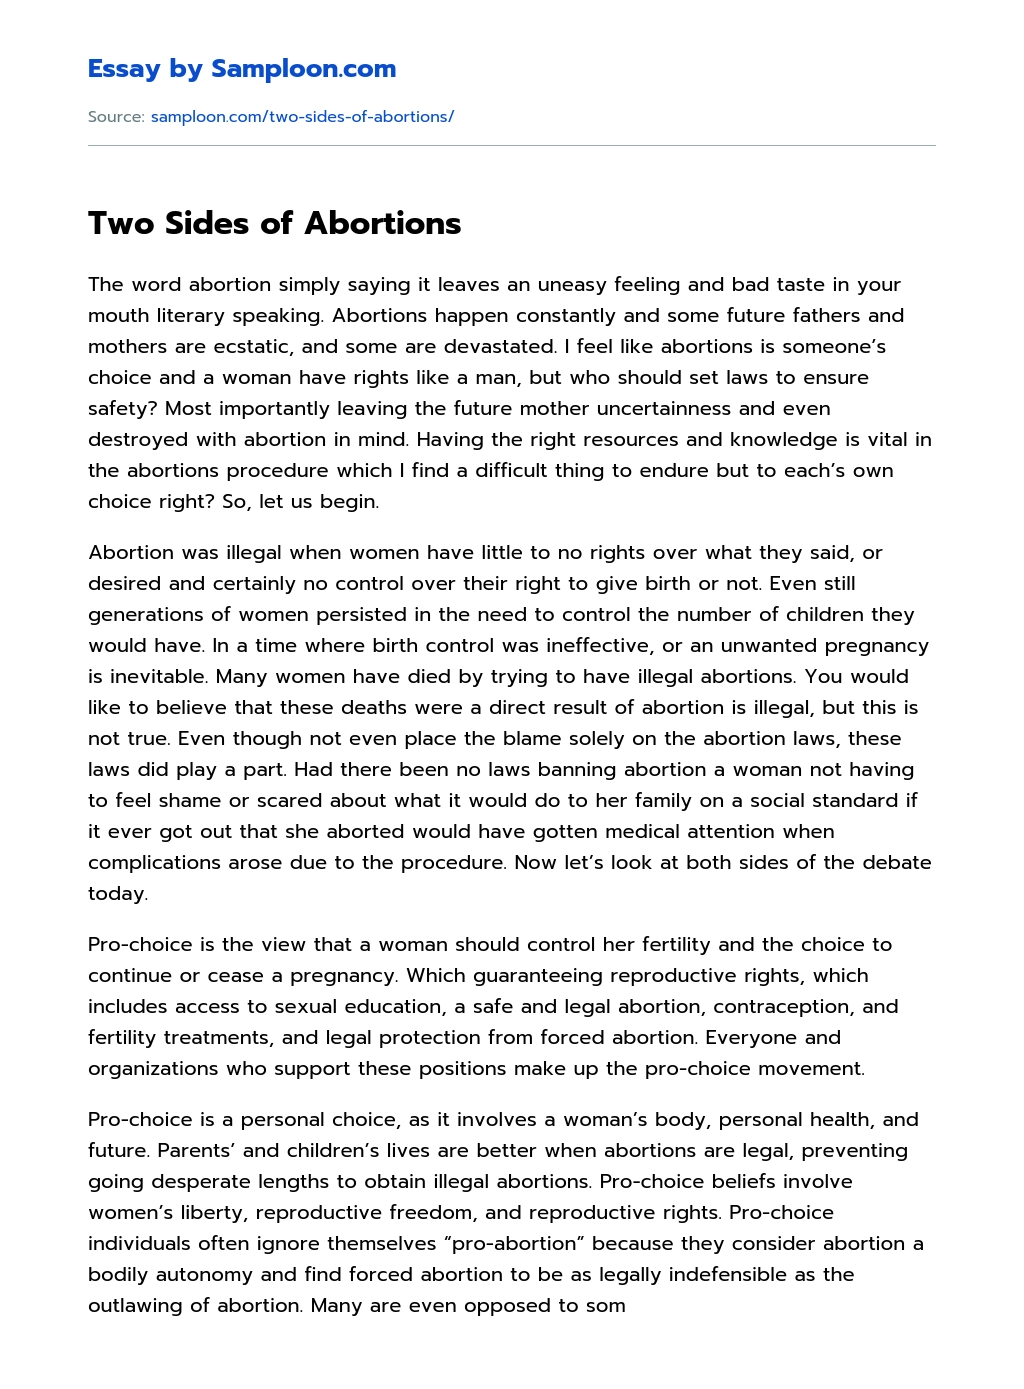 Two Sides of Abortions essay